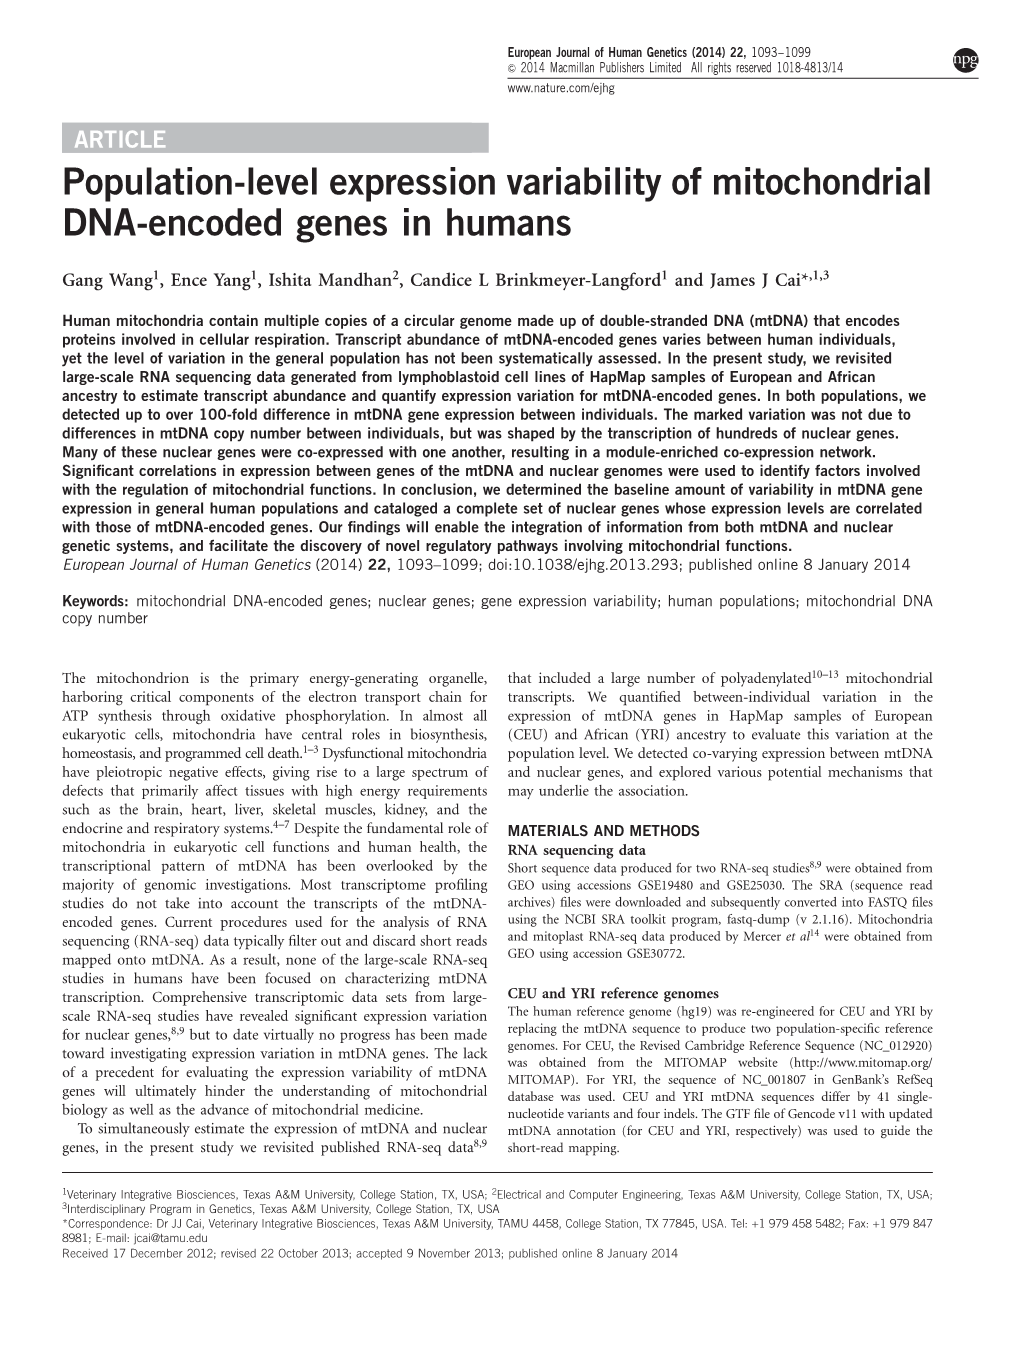 Population-Level Expression Variability of Mitochondrial DNA-Encoded Genes in Humans